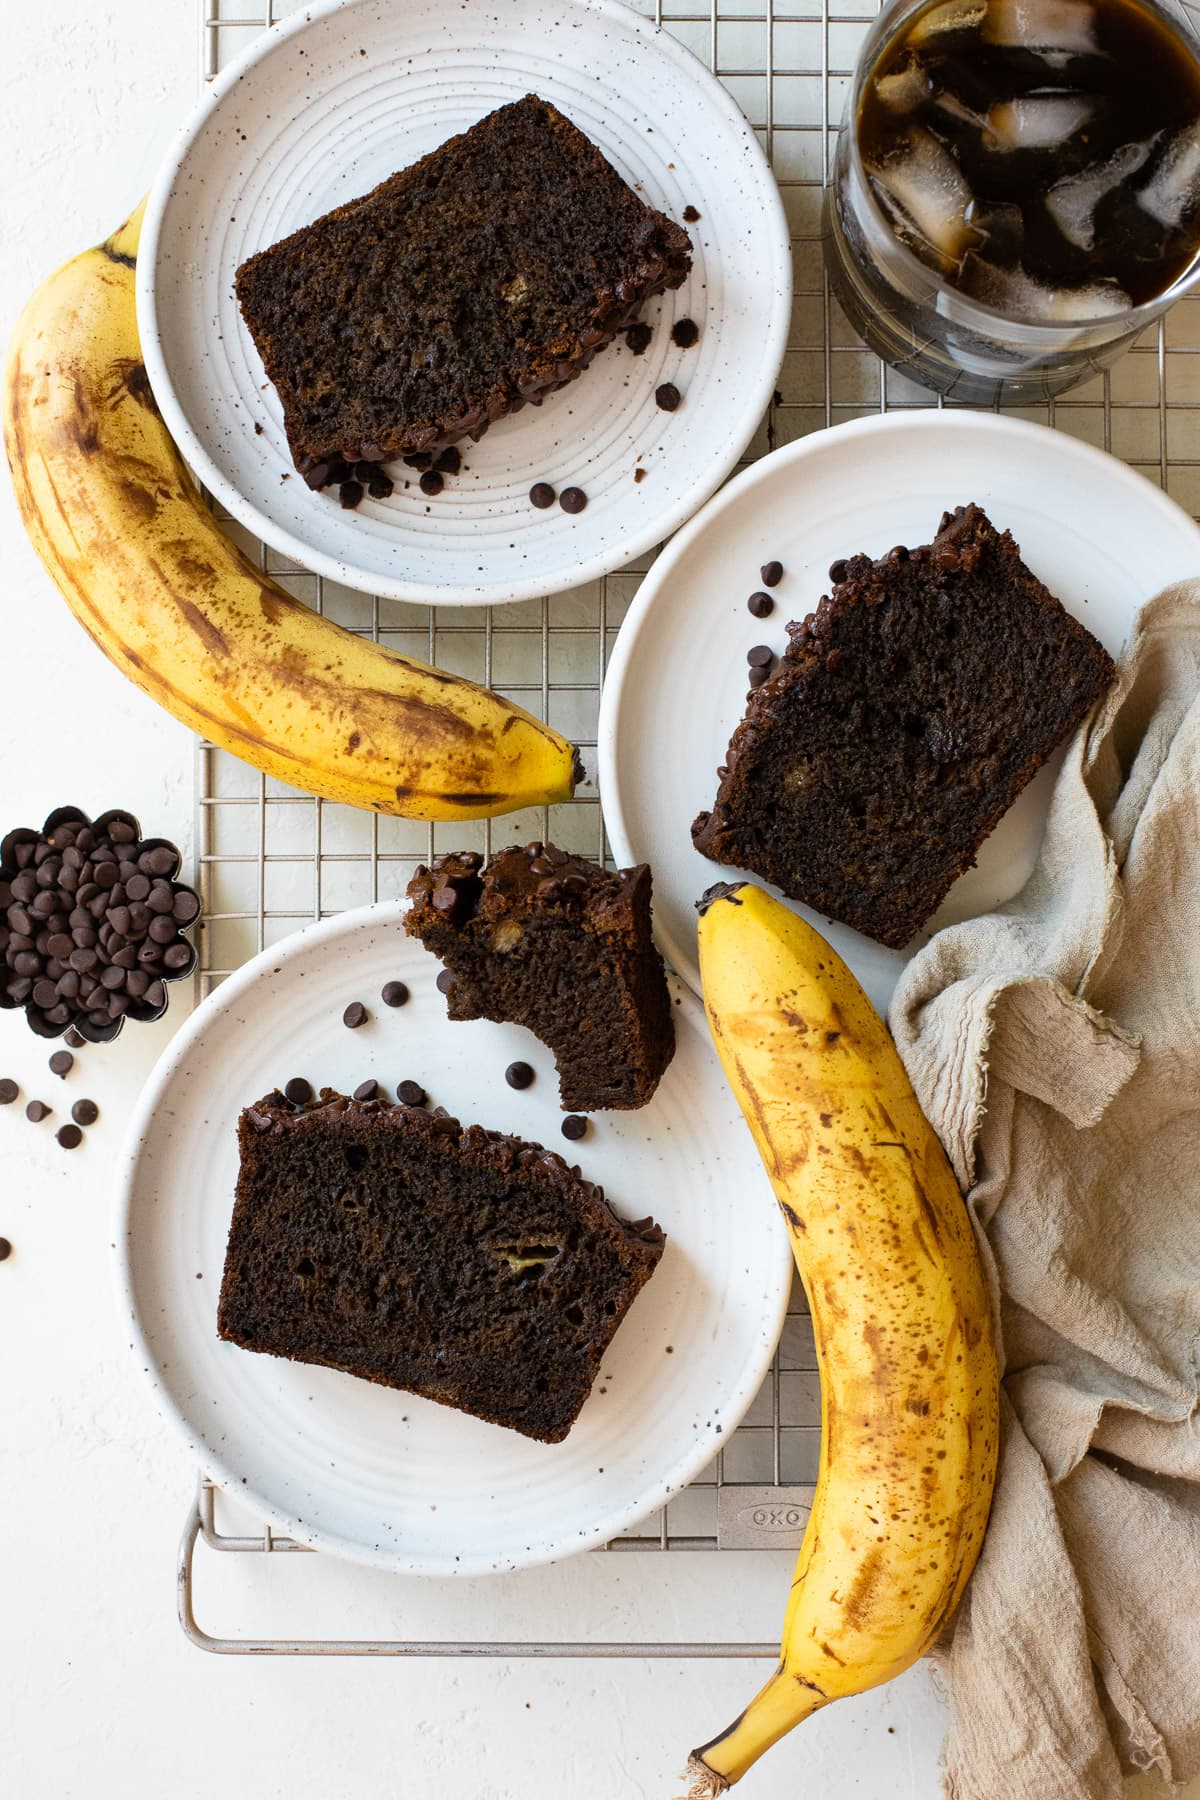 Banana bread slices on plates with ripe bananas and iced coffee.